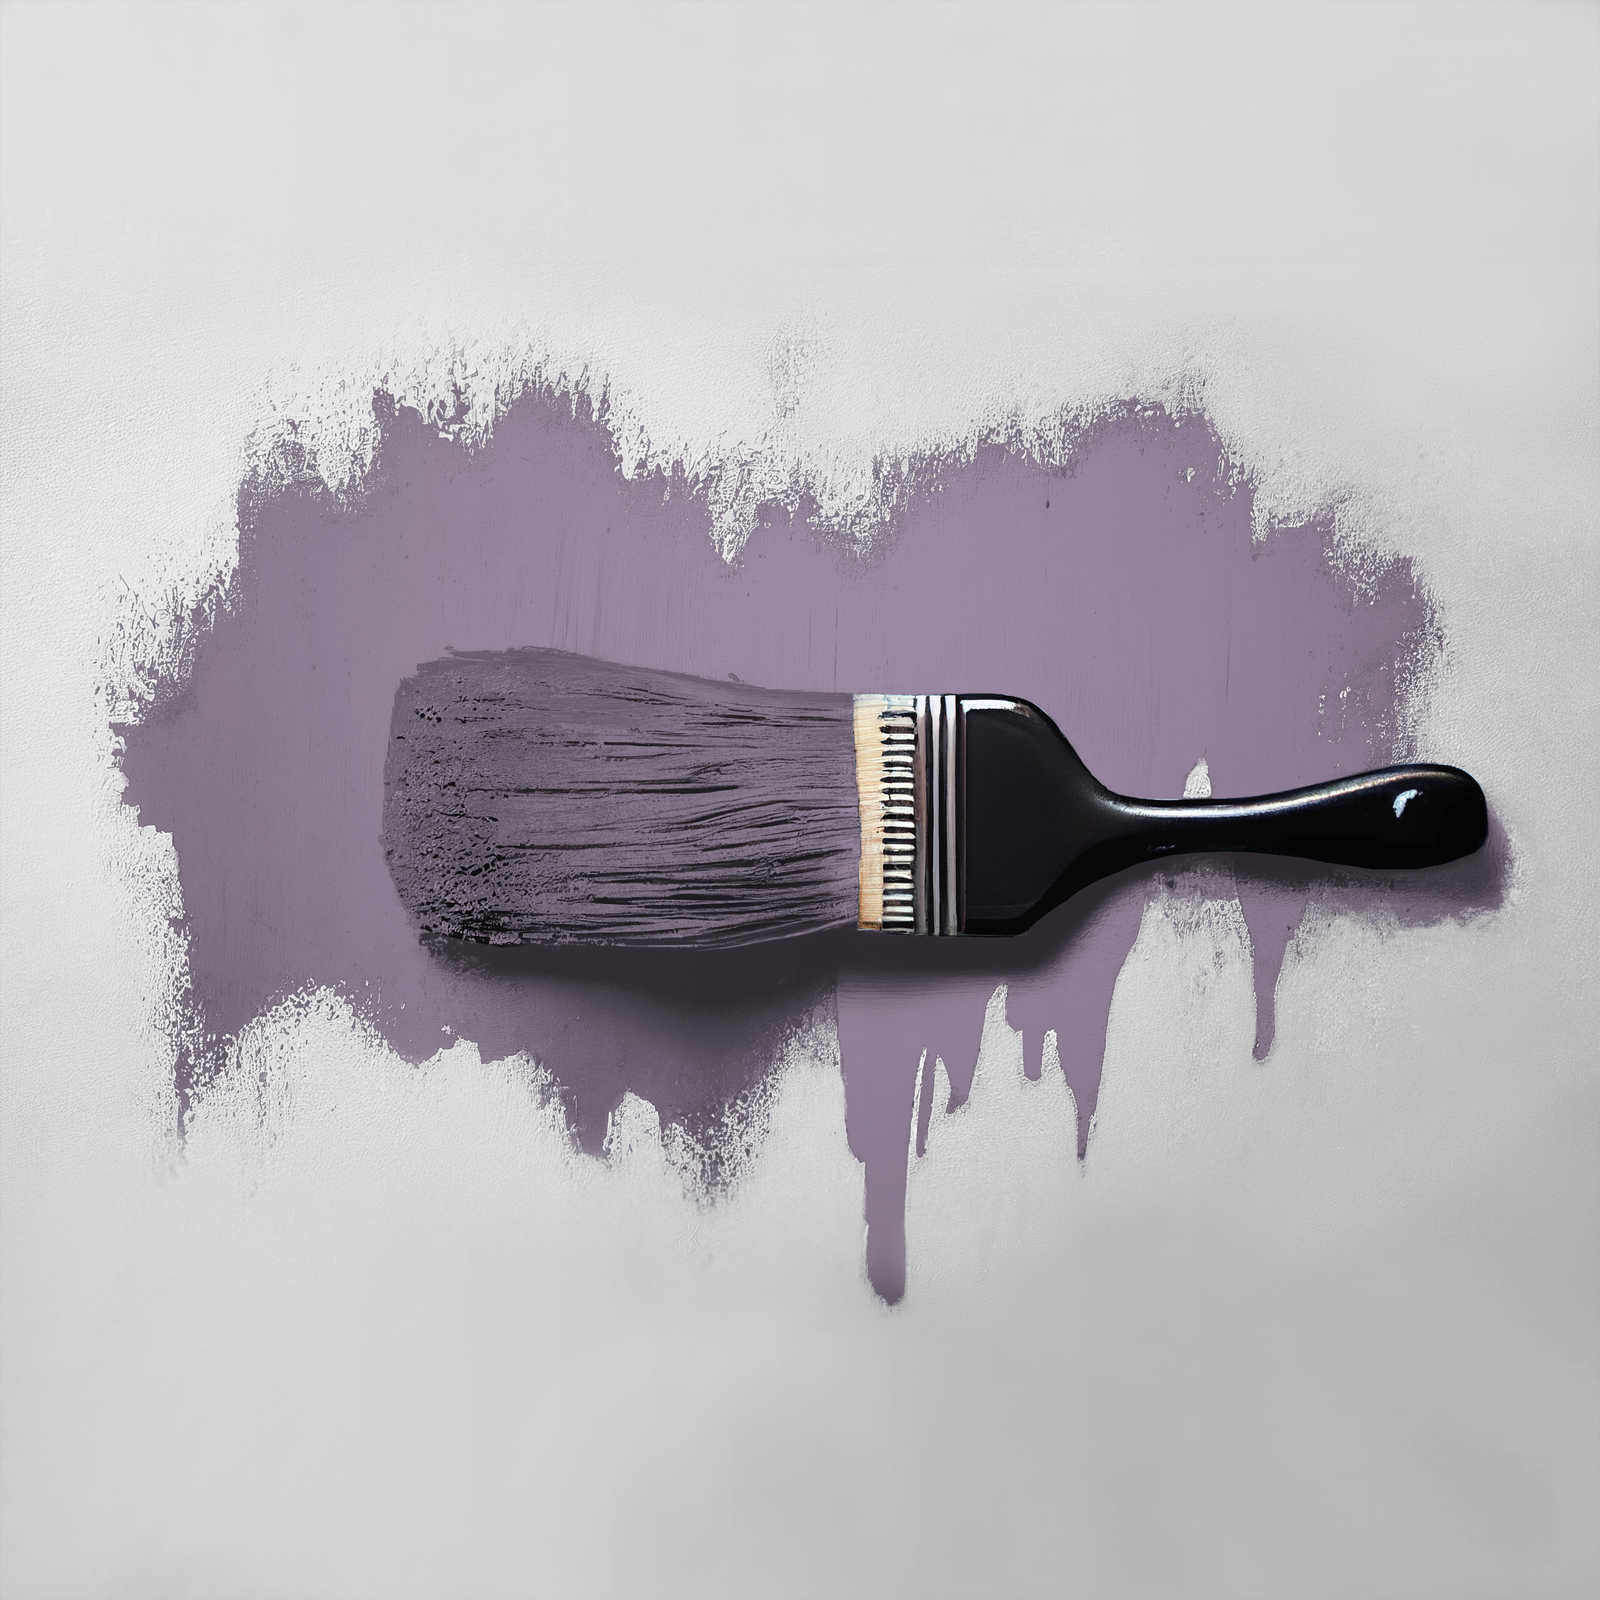             Wall Paint TCK2006 »Artful Aubergine« in strong violet – 2.5 litre
        